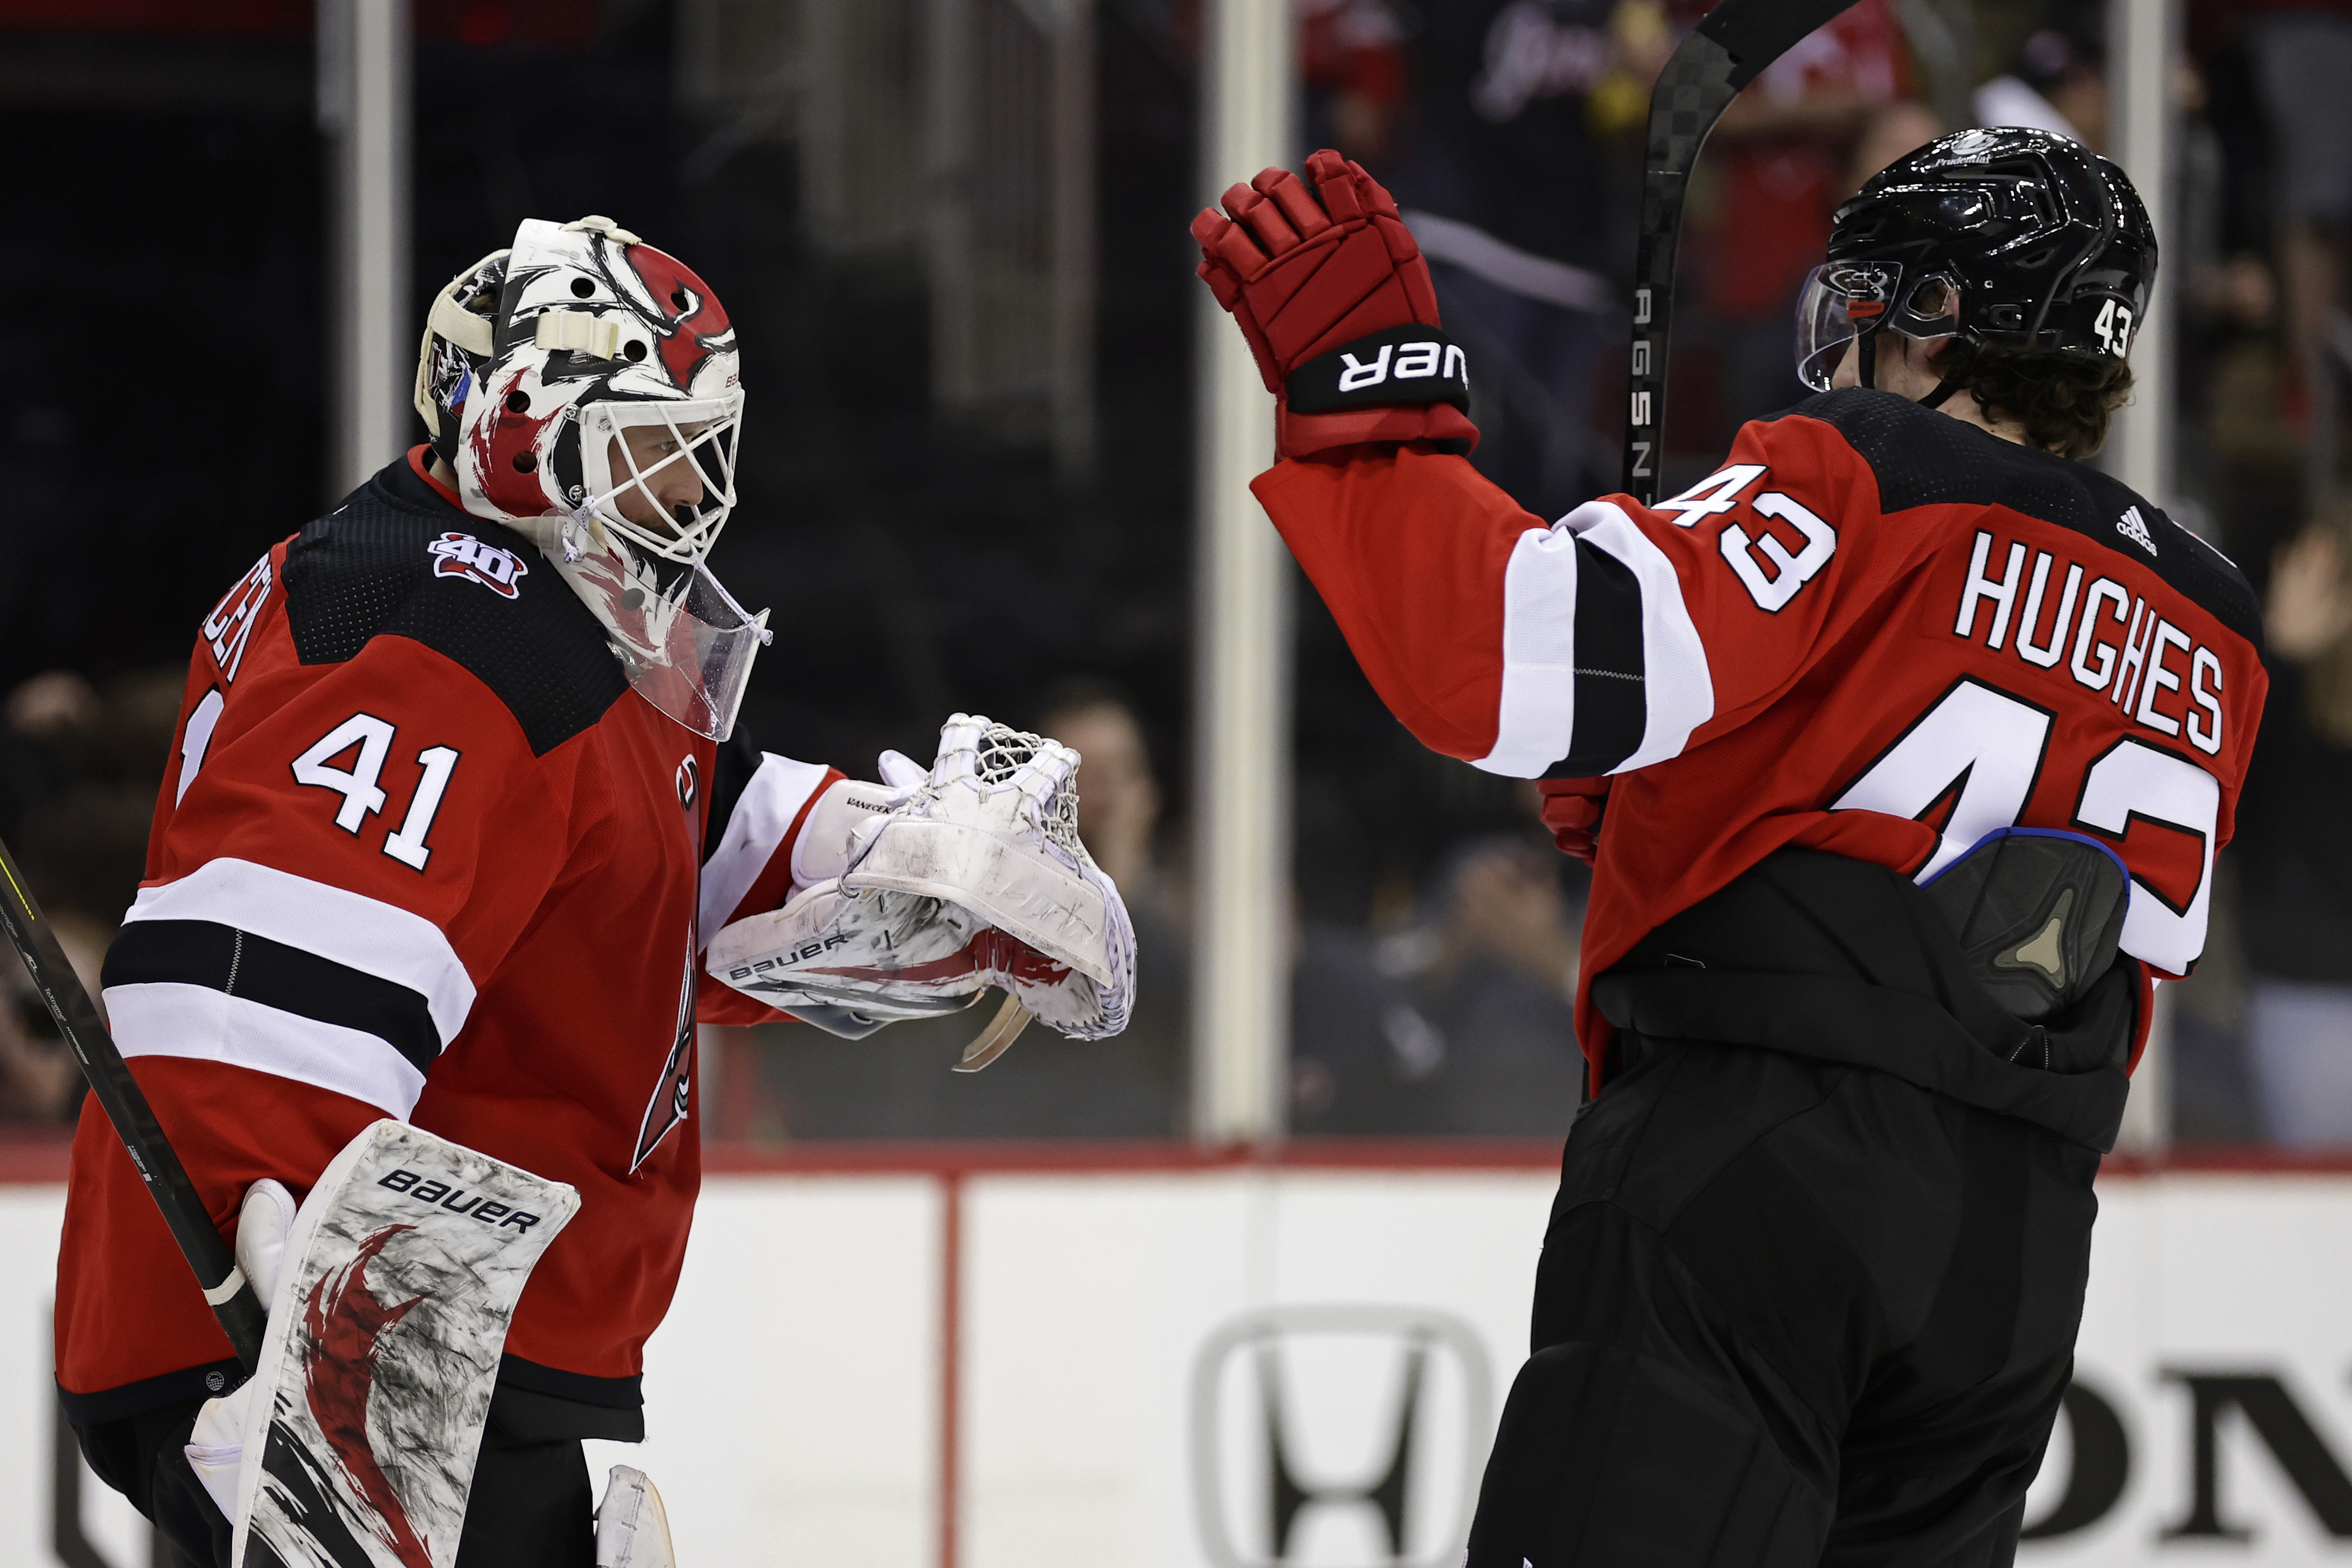 Nico Hischier and Jack Hughes provide offense for New Jersey Devils